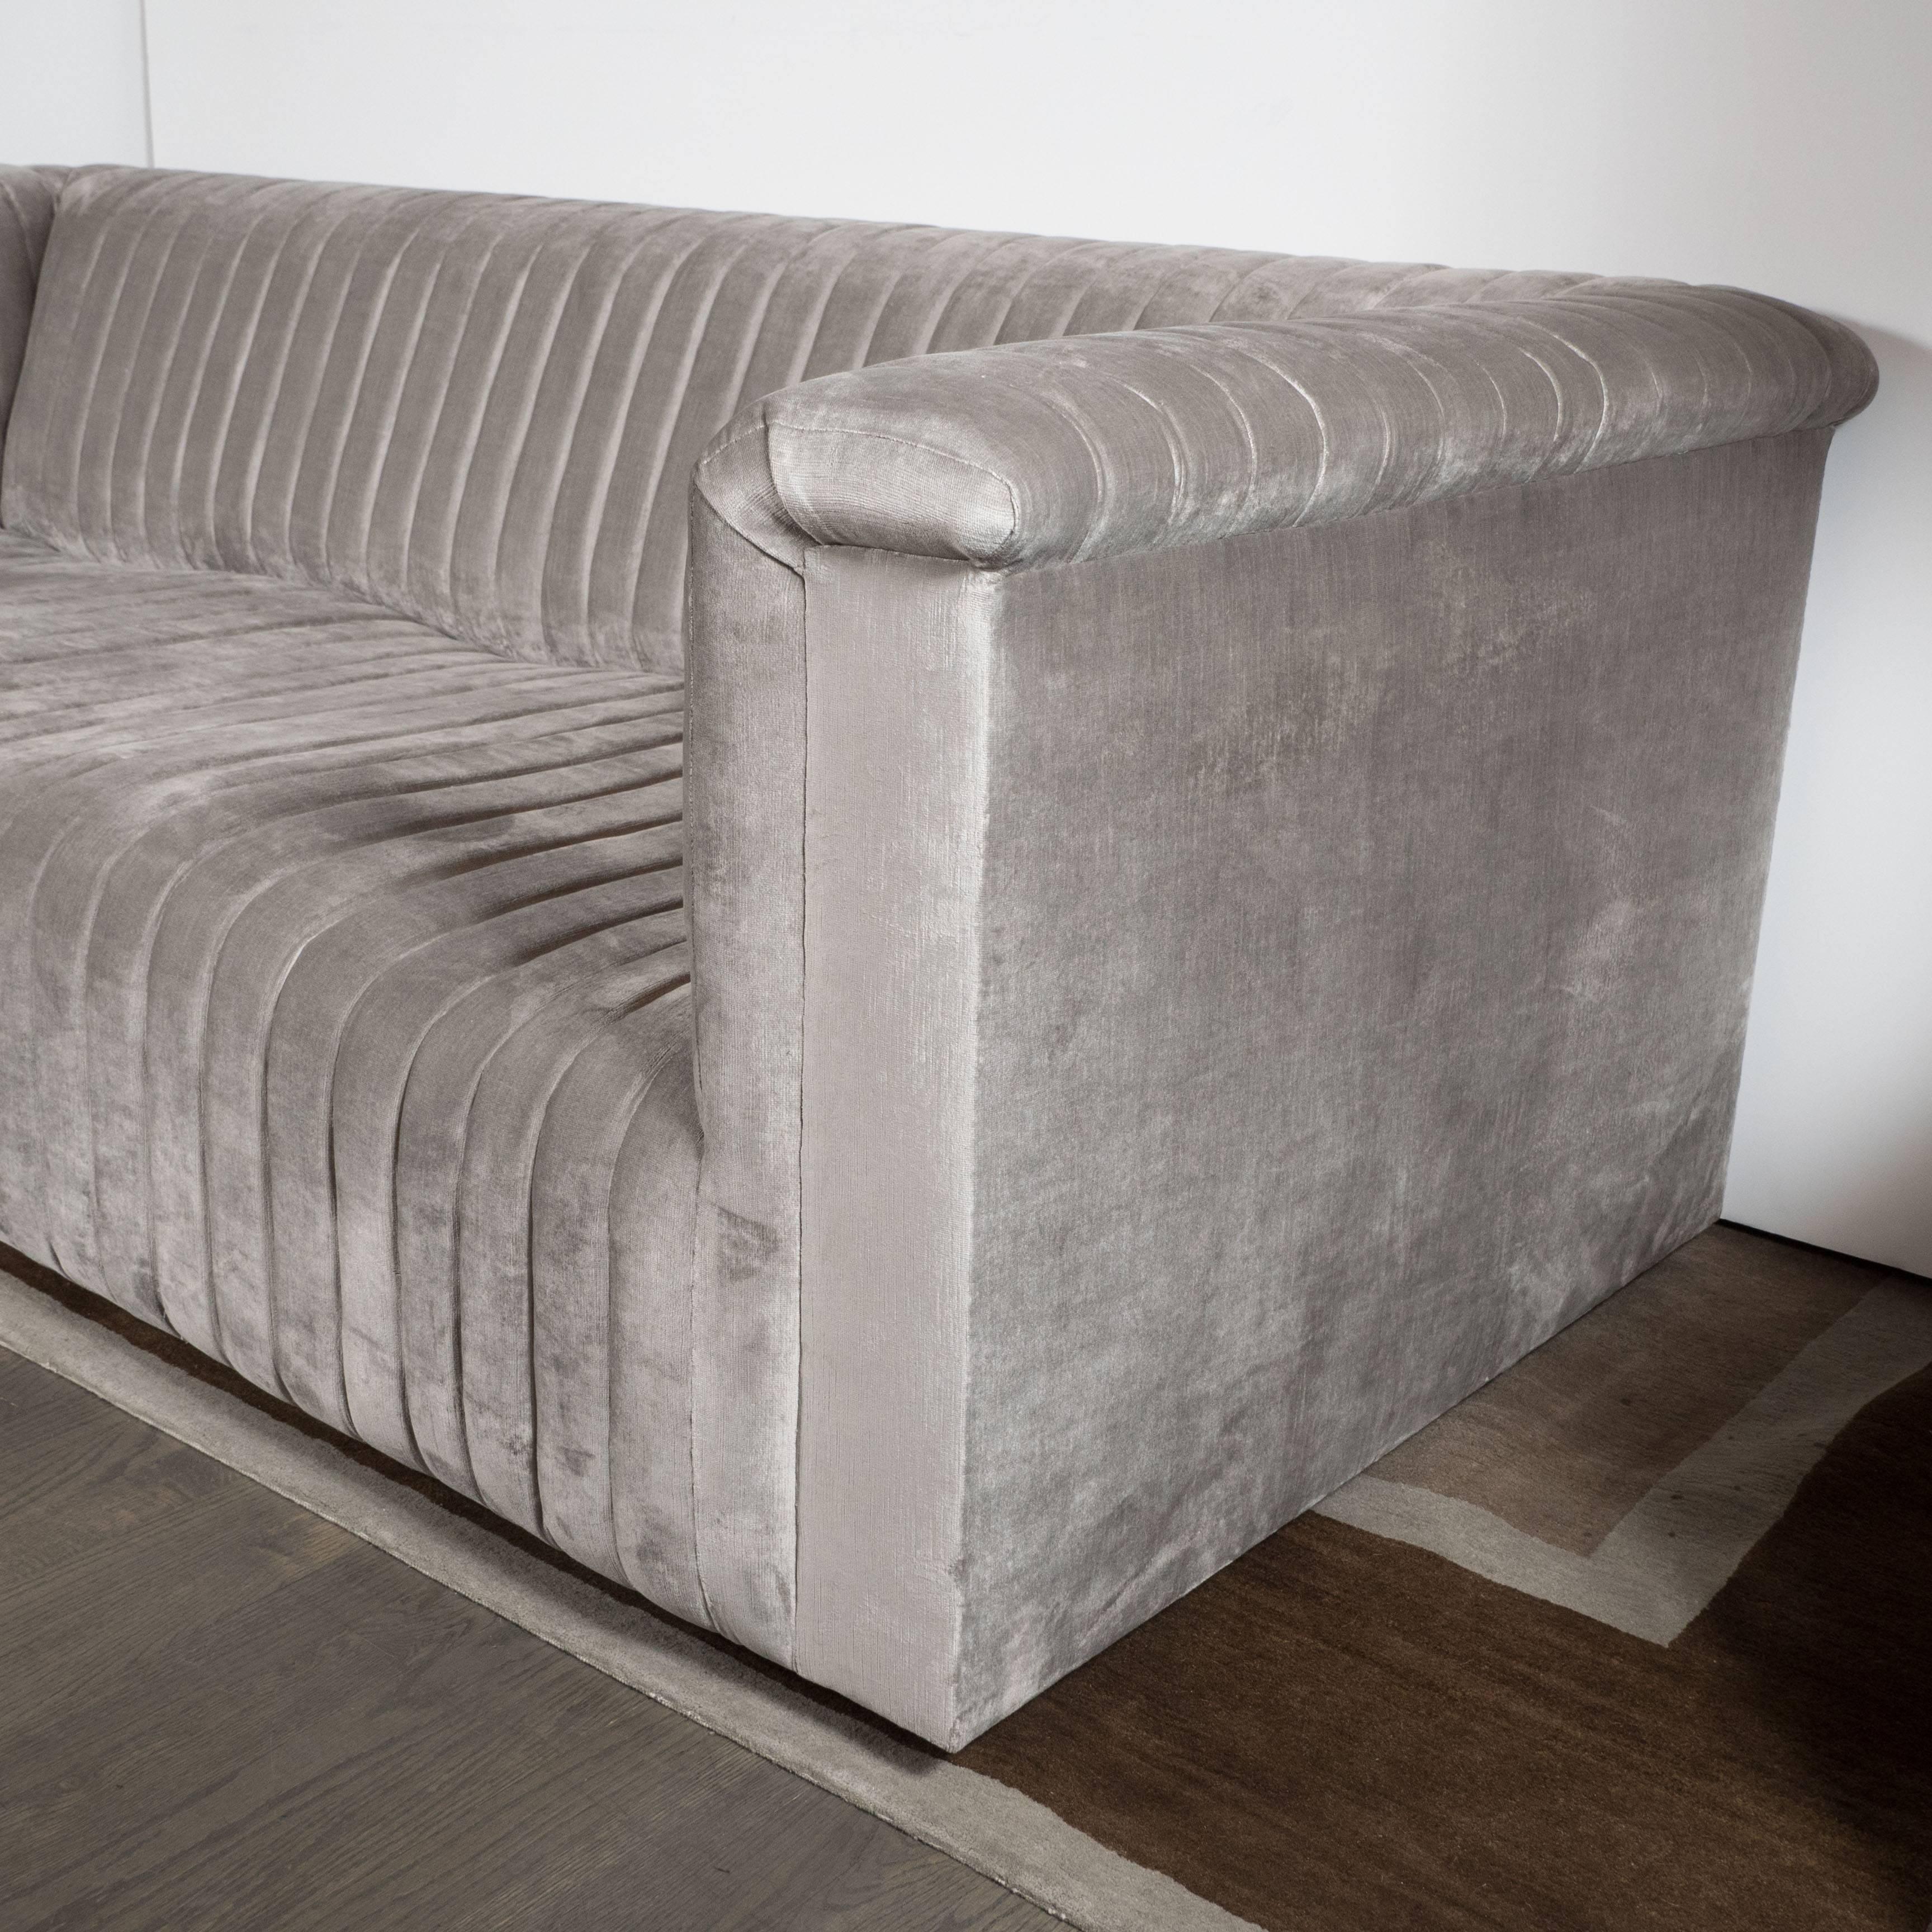 A custom modernist channel design sofa in platinum velvet upholstery. Vertical bands form a wave-like pattern across the seat. The channel design continues along the arms and seat back of the sofa. It has been fully upholstered in a luxe platinum